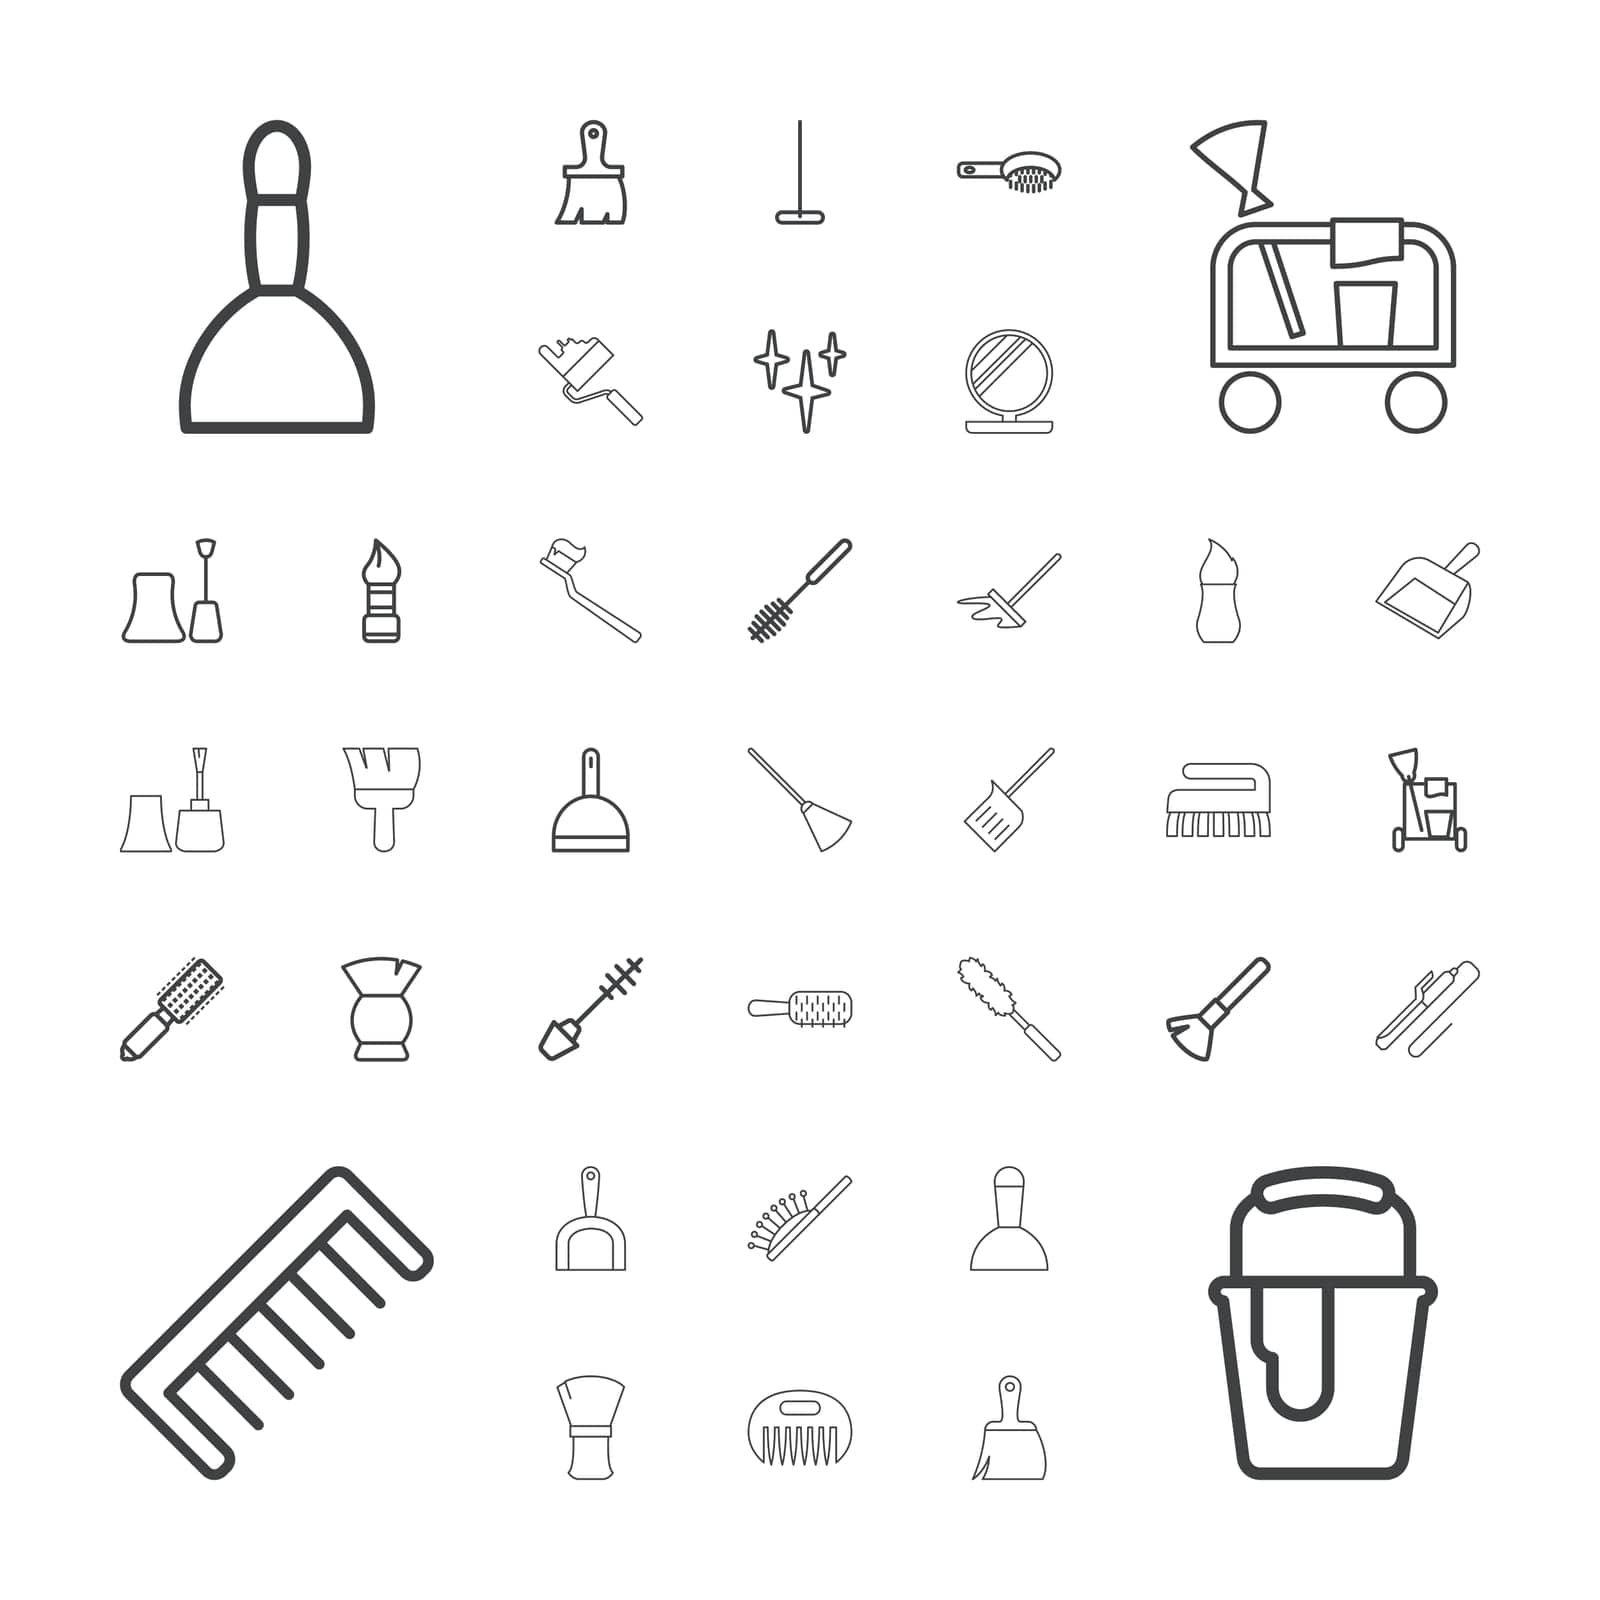 symbol,icon,isolated,paint,bag,dustpan,powder,curler,tools,mop,hair,white,design,vector,dust,tooth,brush,cleaning,set,spa,nail,broom,equipment,shaving,clean,tool,comb,bucket,toilet,illustration,polish,mascara,roller by ogqcorp